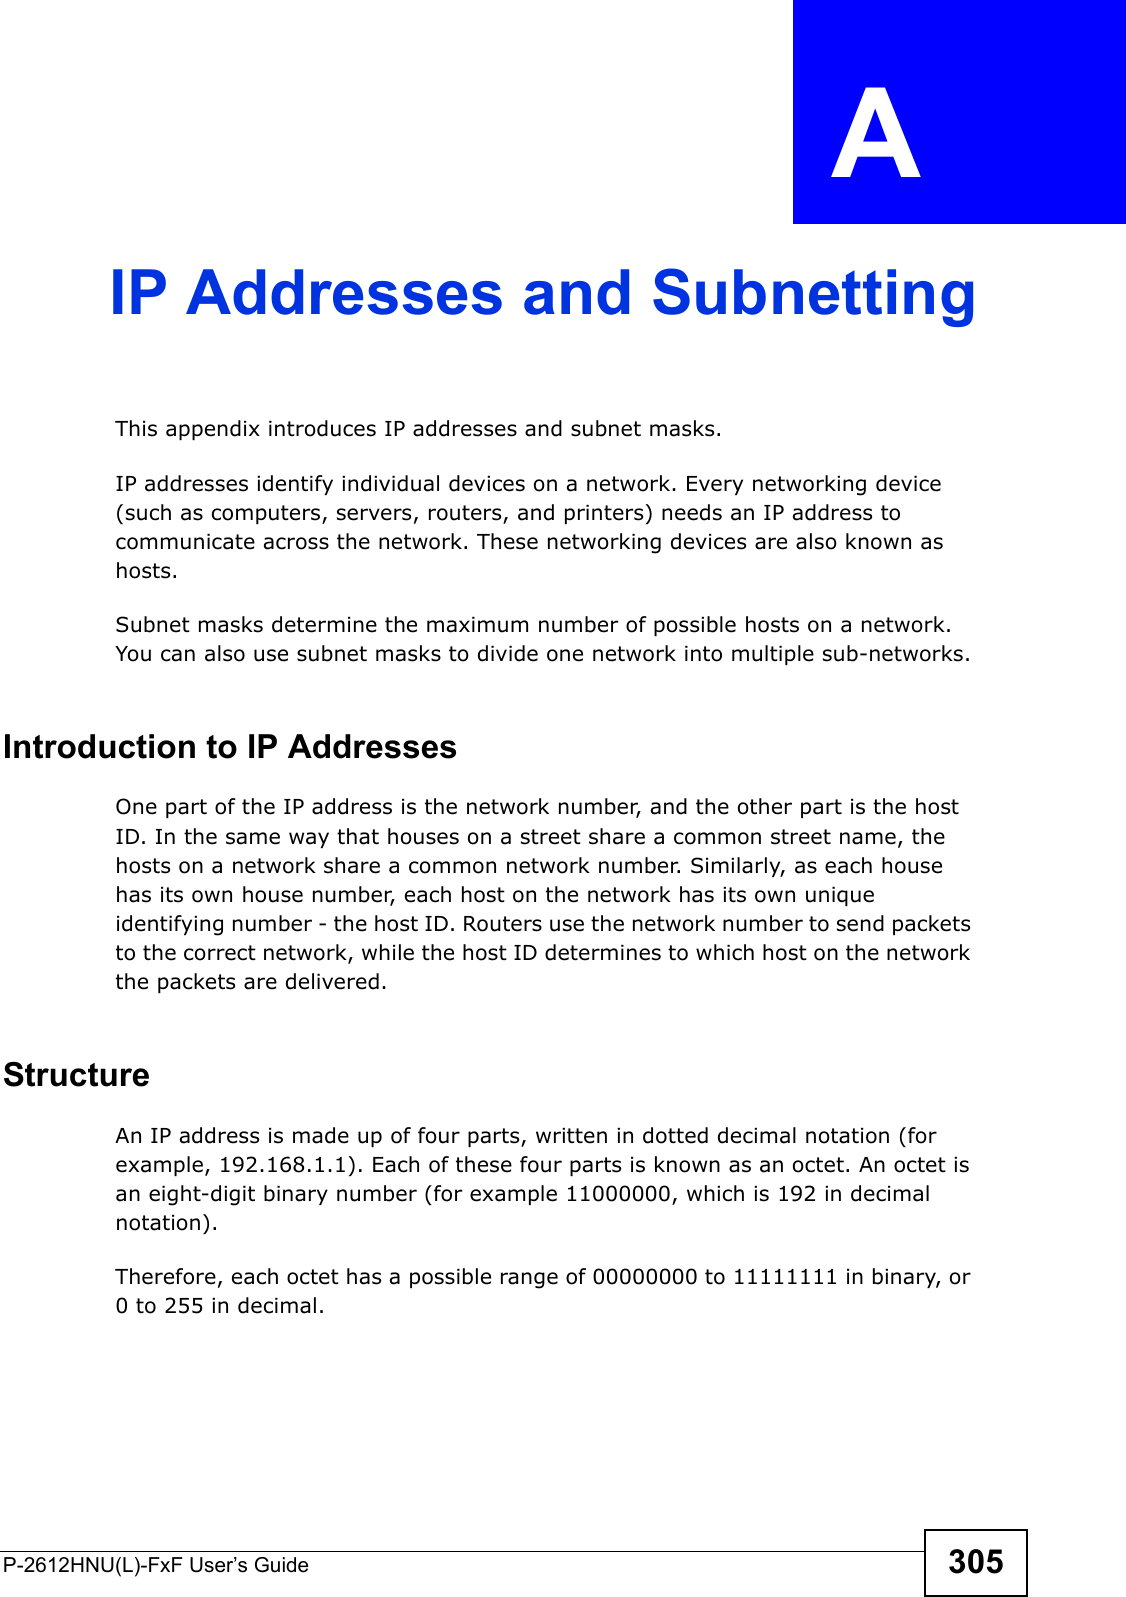 P-2612HNU(L)-FxF User’s Guide 305APPENDIX   A IP Addresses and SubnettingThis appendix introduces IP addresses and subnet masks.IP addresses identify individual devices on a network. Every networking device (such as computers, servers, routers, and printers) needs an IP address to communicate across the network. These networking devices are also known as hosts.Subnet masks determine the maximum number of possible hosts on a network. You can also use subnet masks to divide one network into multiple sub-networks.Introduction to IP AddressesOne part of the IP address is the network number, and the other part is the hostID. In the same way that houses on a street share a common street name, the hosts on a network share a common network number. Similarly, as each house has its own house number, each host on the network has its own uniqueidentifying number - the host ID. Routers use the network number to send packets to the correct network, while the host ID determines to which host on the networkthe packets are delivered.StructureAn IP address is made up of four parts, written in dotted decimal notation (for example, 192.168.1.1). Each of these four parts is known as an octet. An octet isan eight-digit binary number (for example 11000000, which is 192 in decimal notation).Therefore, each octet has a possible range of 00000000 to 11111111 in binary, or 0 to 255 in decimal.